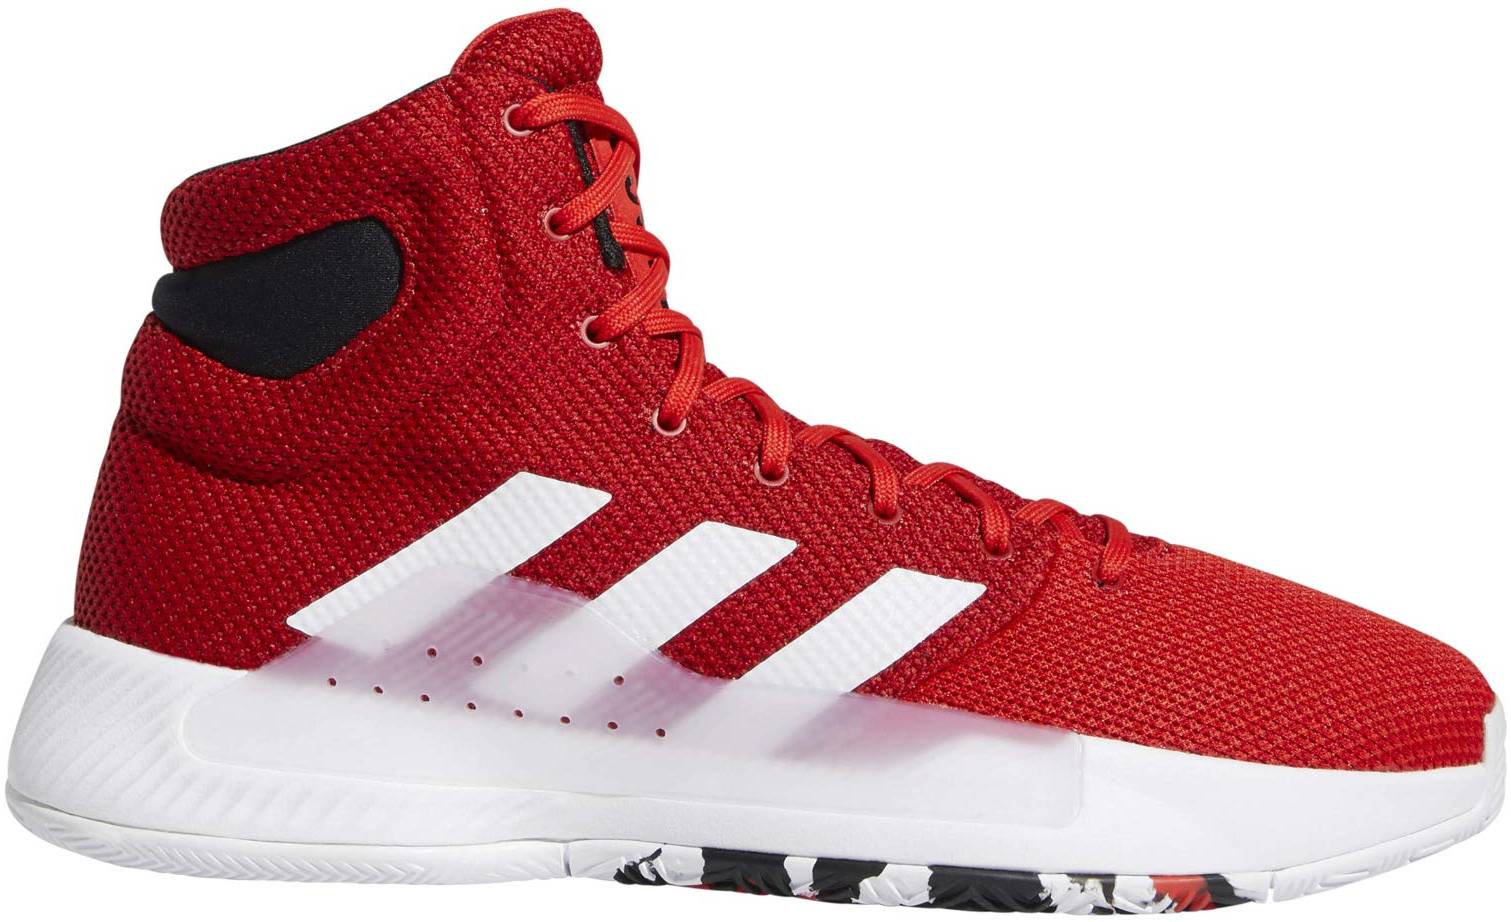 Save 47% on Red Adidas Basketball Shoes 